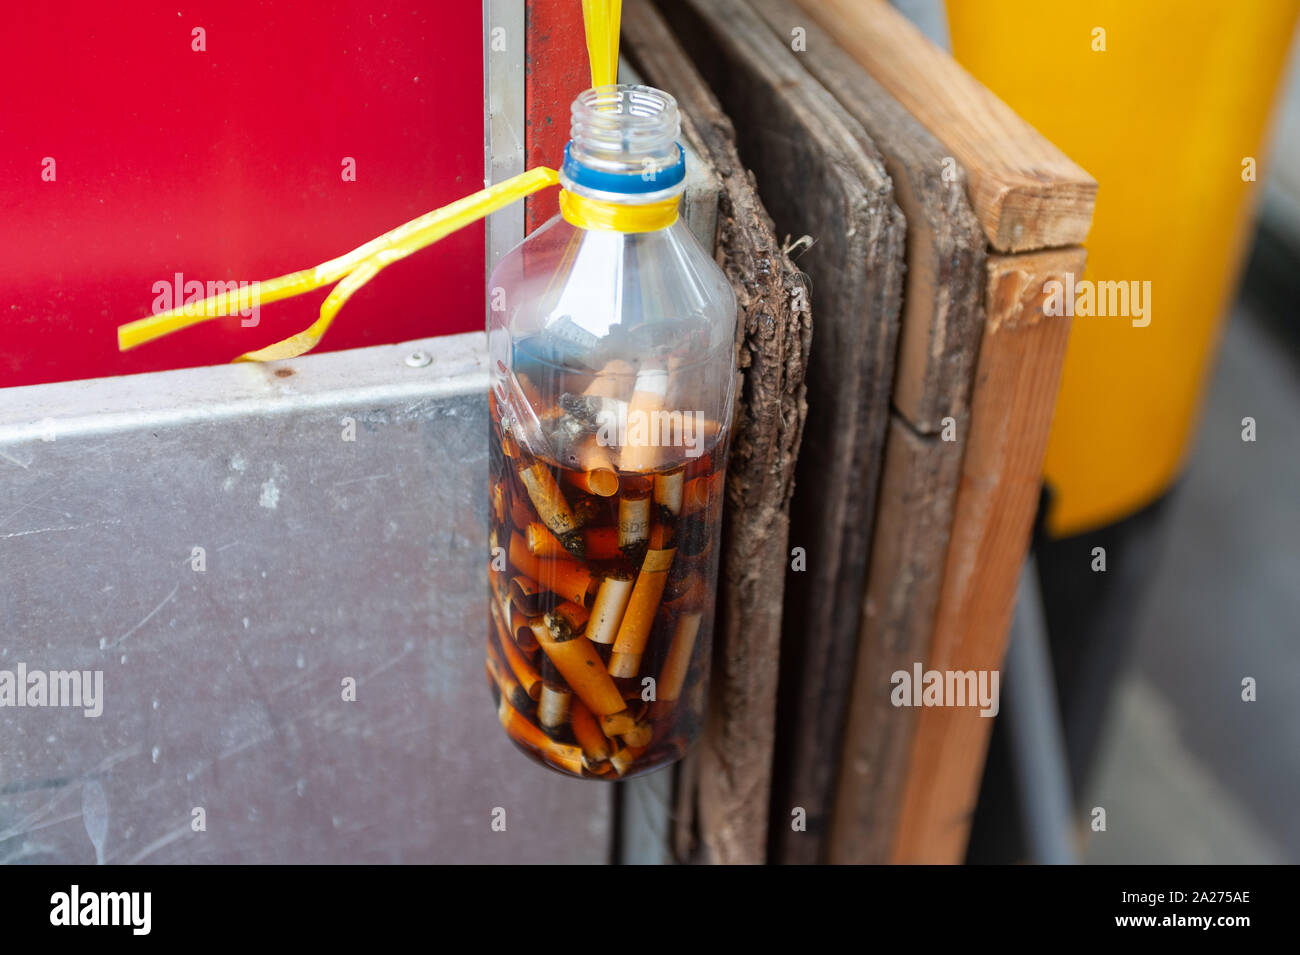 24.02.2019, Singapore, , Singapore - A plastic bottle in Chinatown serves as an ashtray for cigarette butts. 0SL190224D017CAROEX.JPG [MODEL RELEASE: N Stock Photo